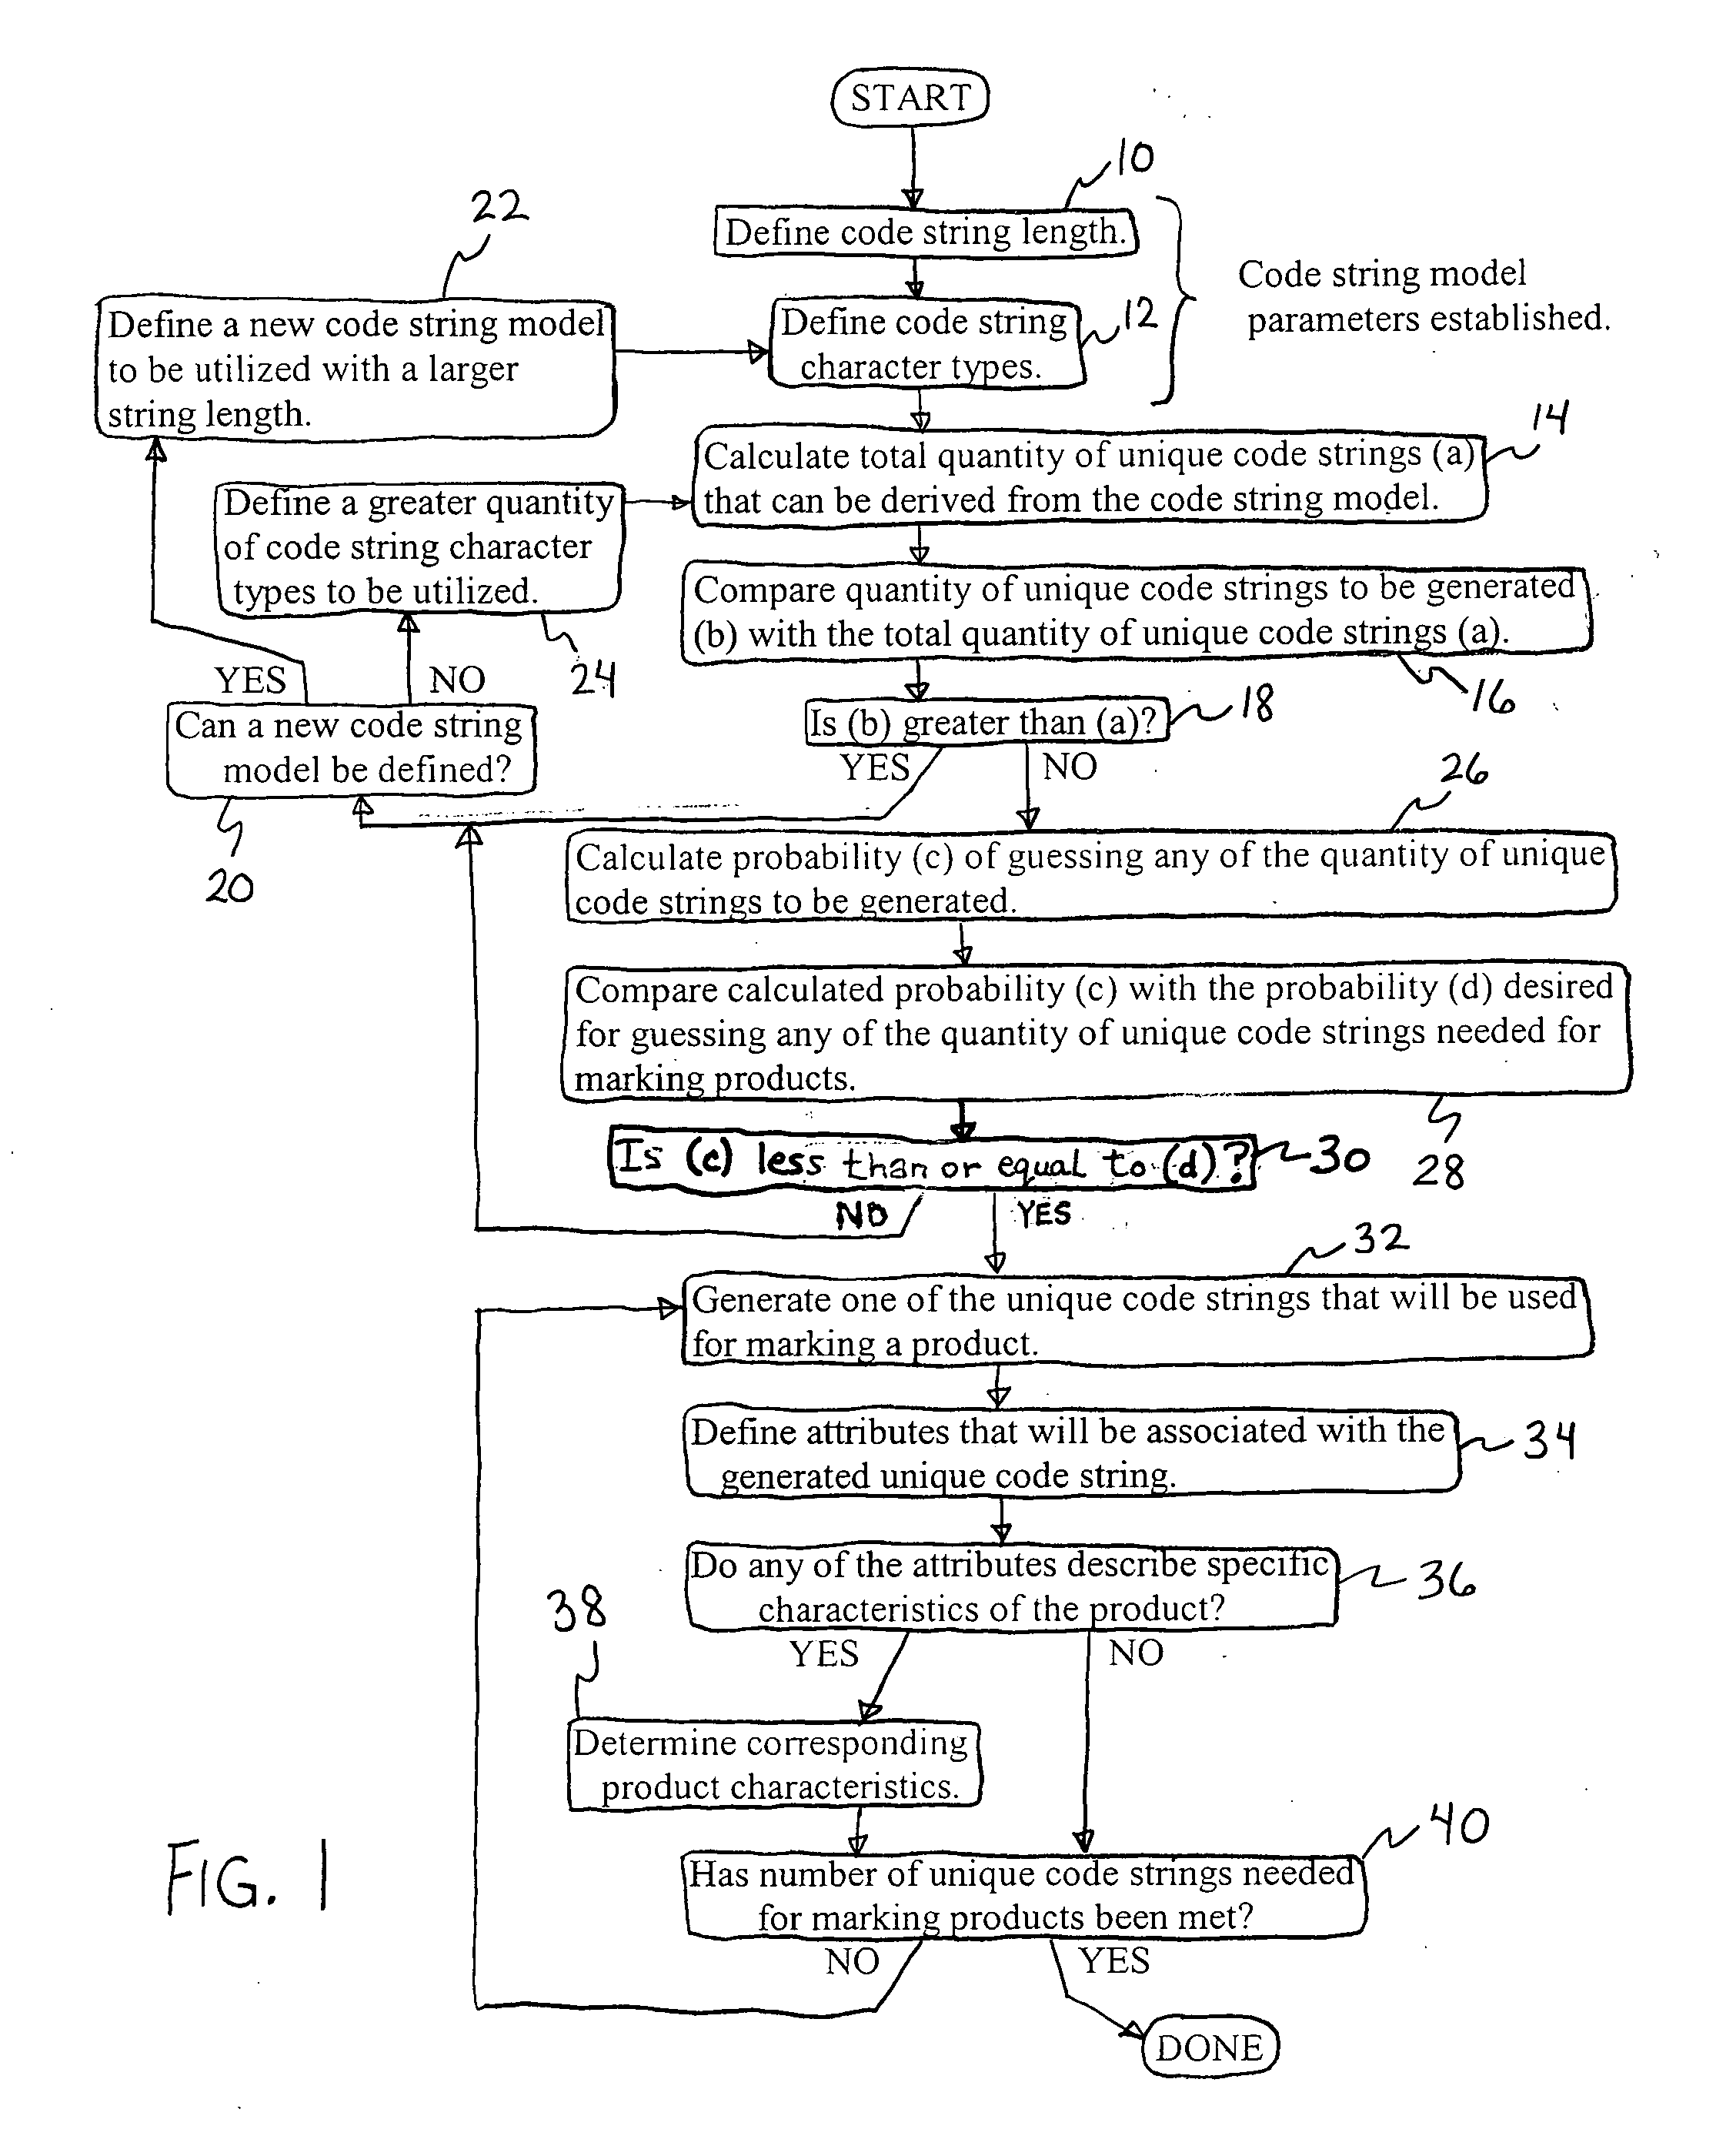 Authentication and tracking system